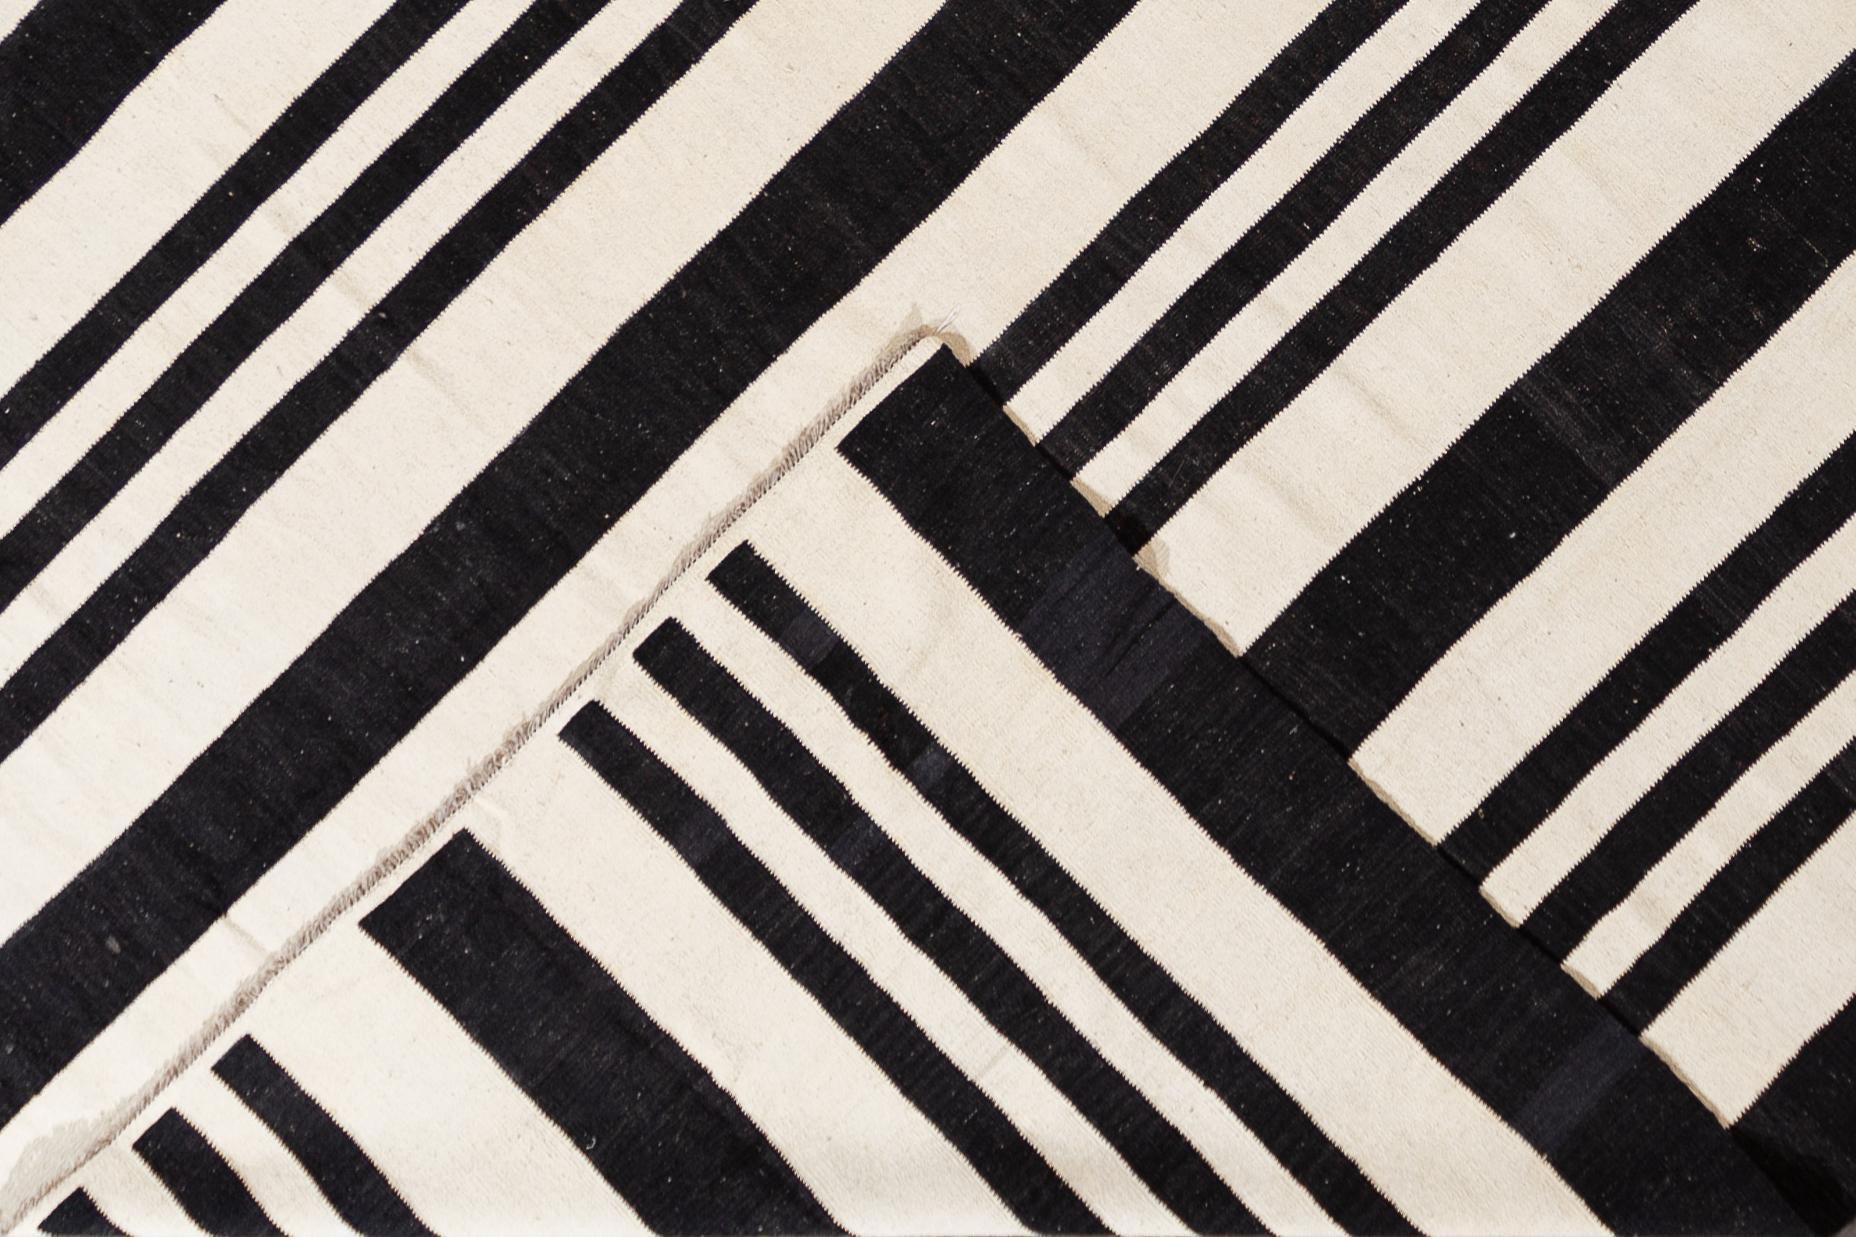 Beautiful 21st century contemporary Kilim rug, handwoven wool in an all-over black and white striped design.

This rug measures 12' 3